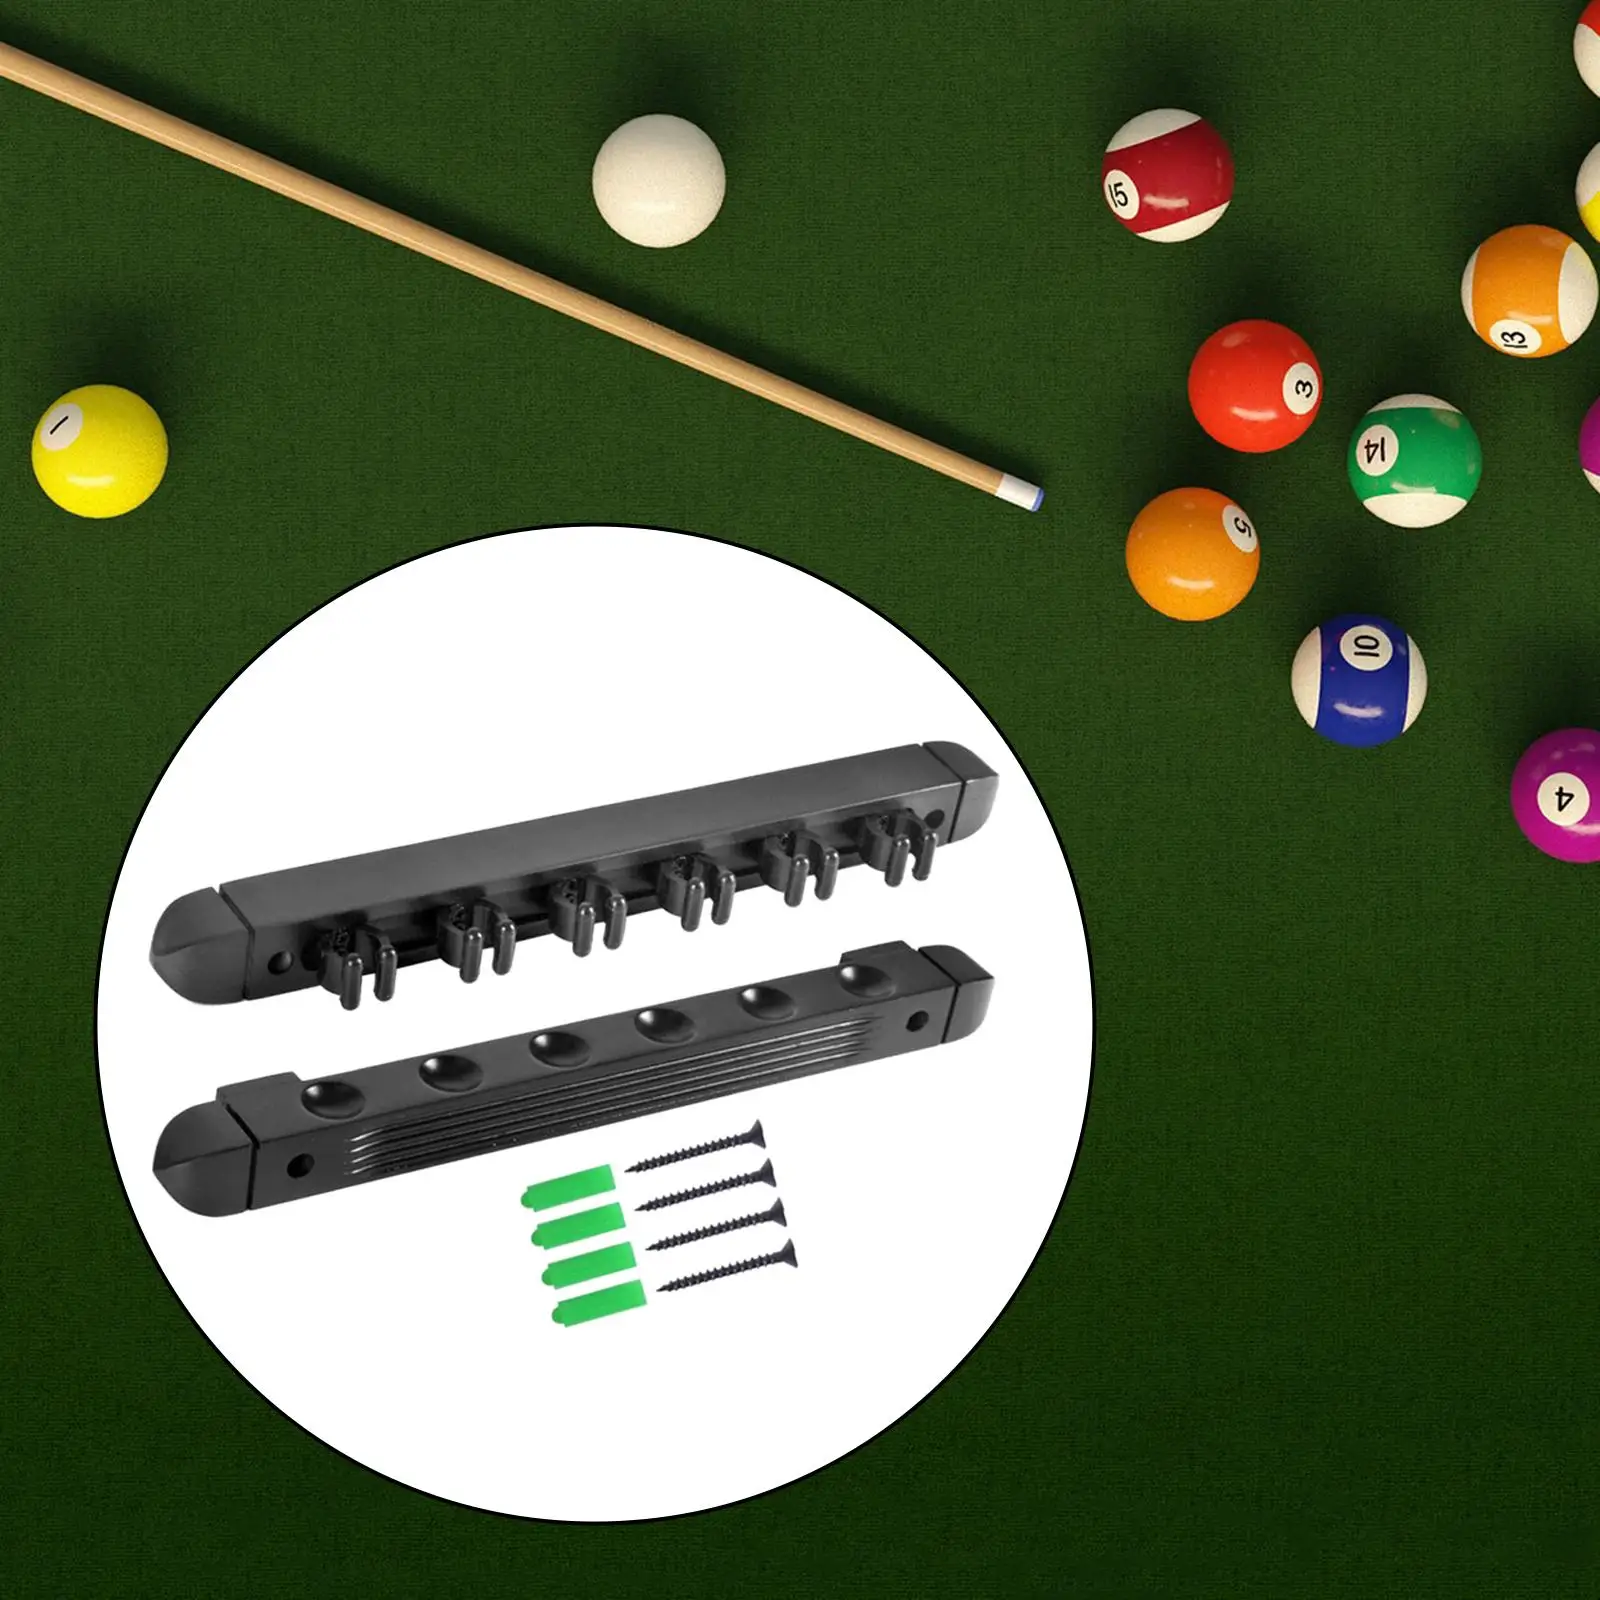 Wall Mount 6 Slot Billiards Snooker Stick Wooden Rack Pool Cue Holder Stand Pool Table Rods Organizer